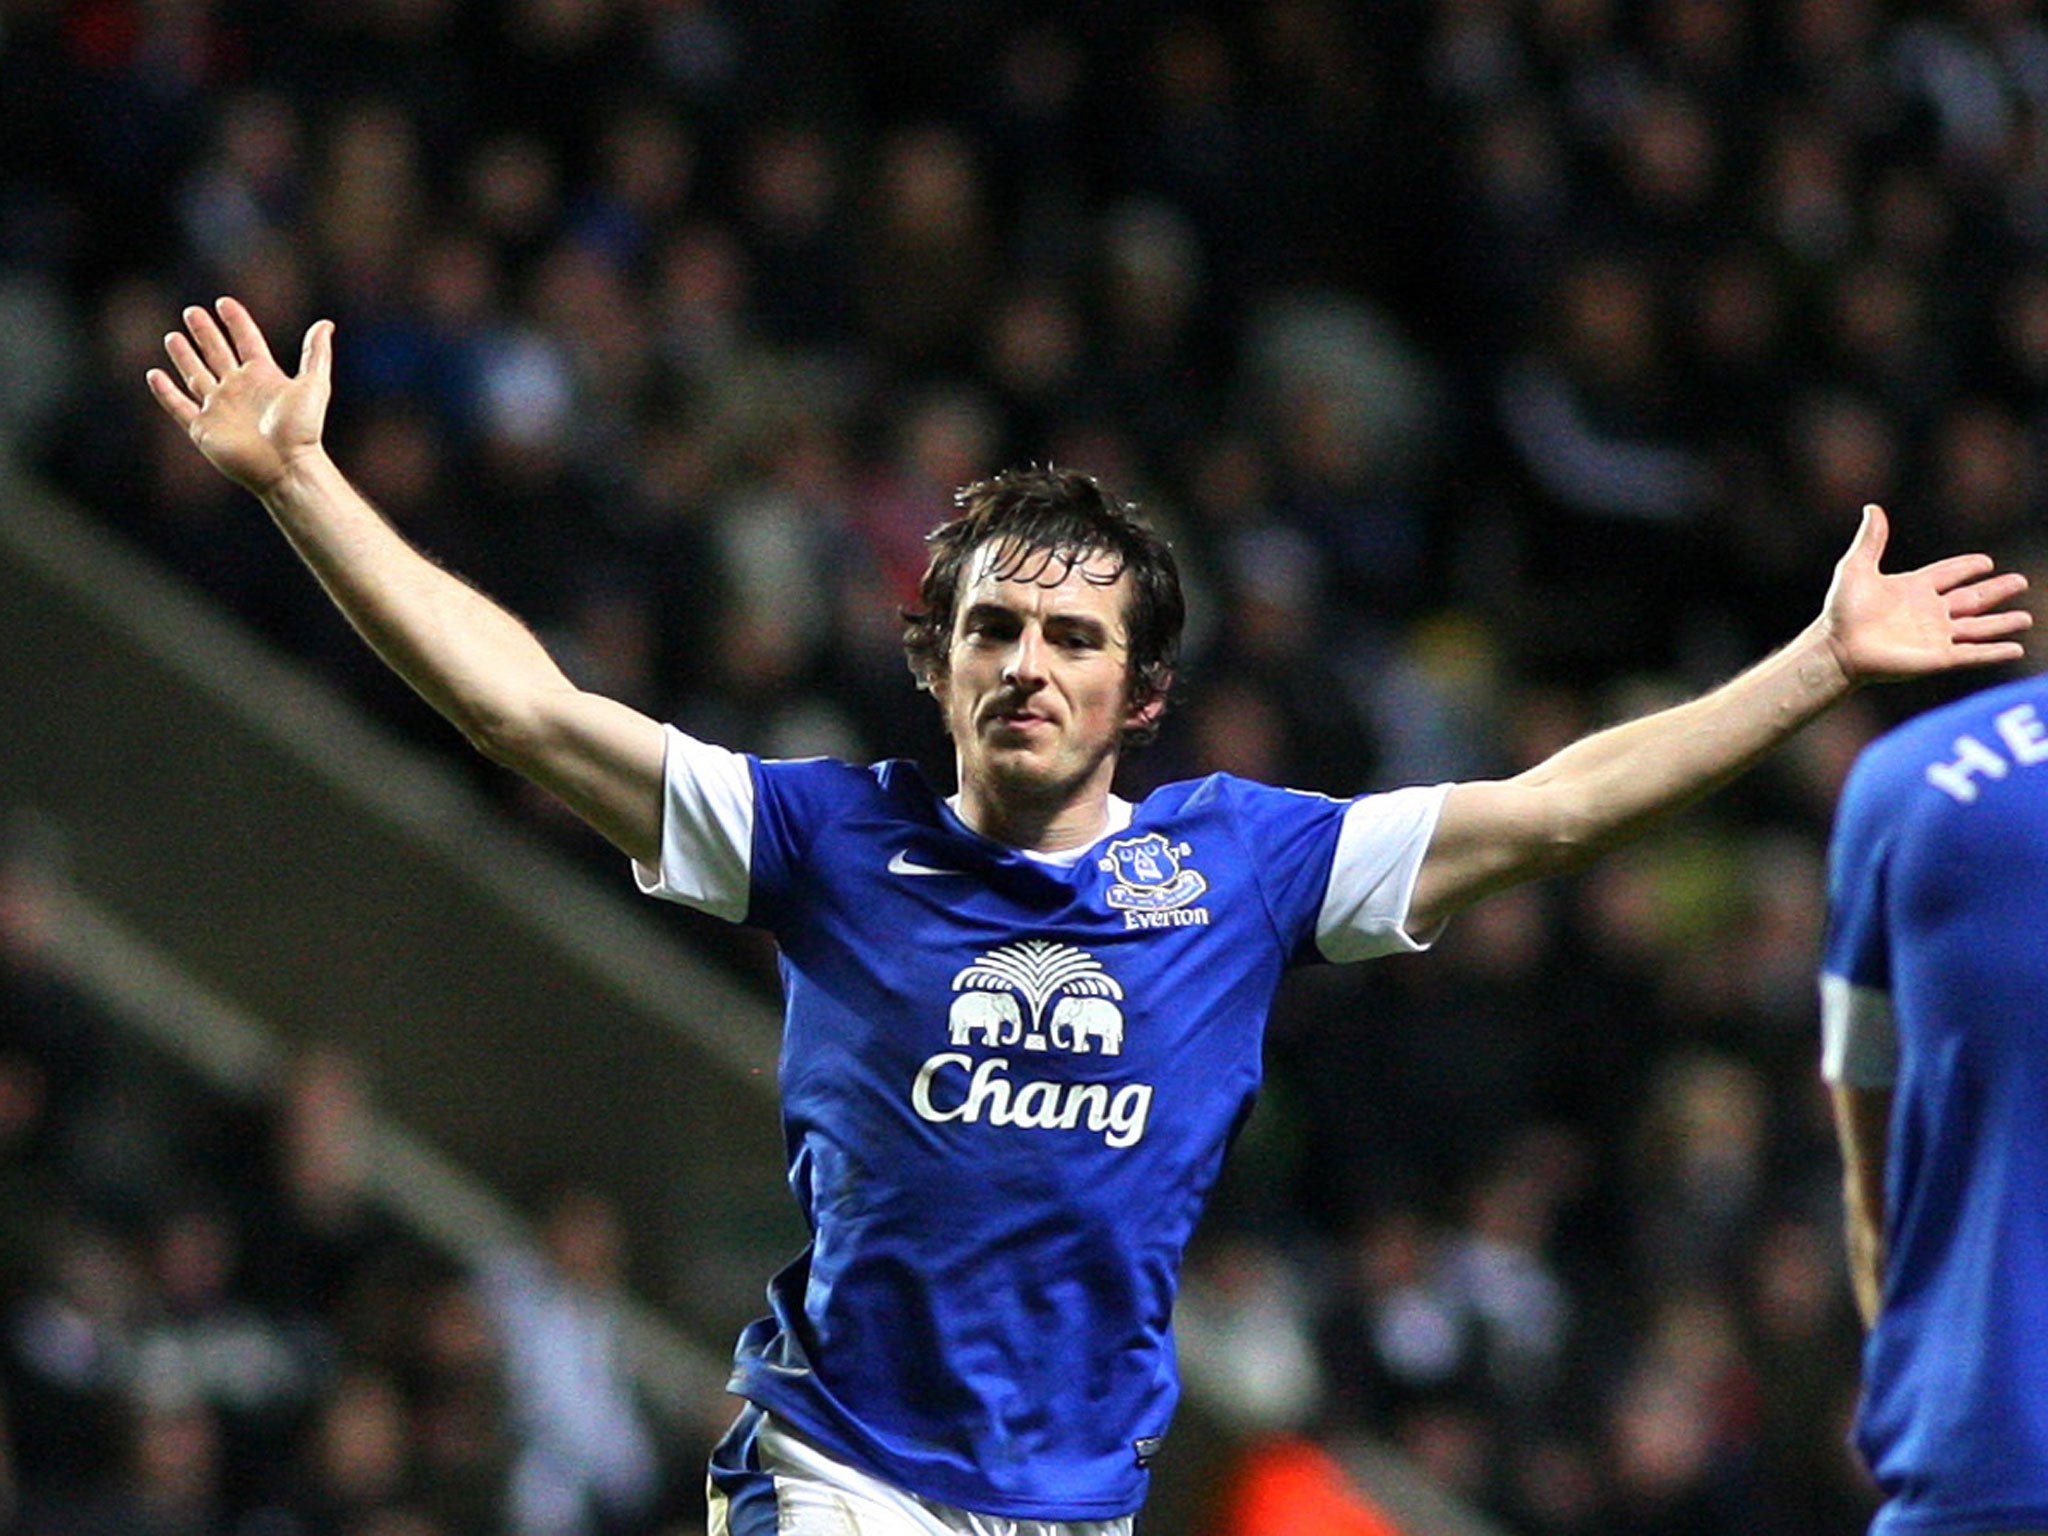 Baines has been singled out as the club's top performing player and the one Martinez would least like to have to sell